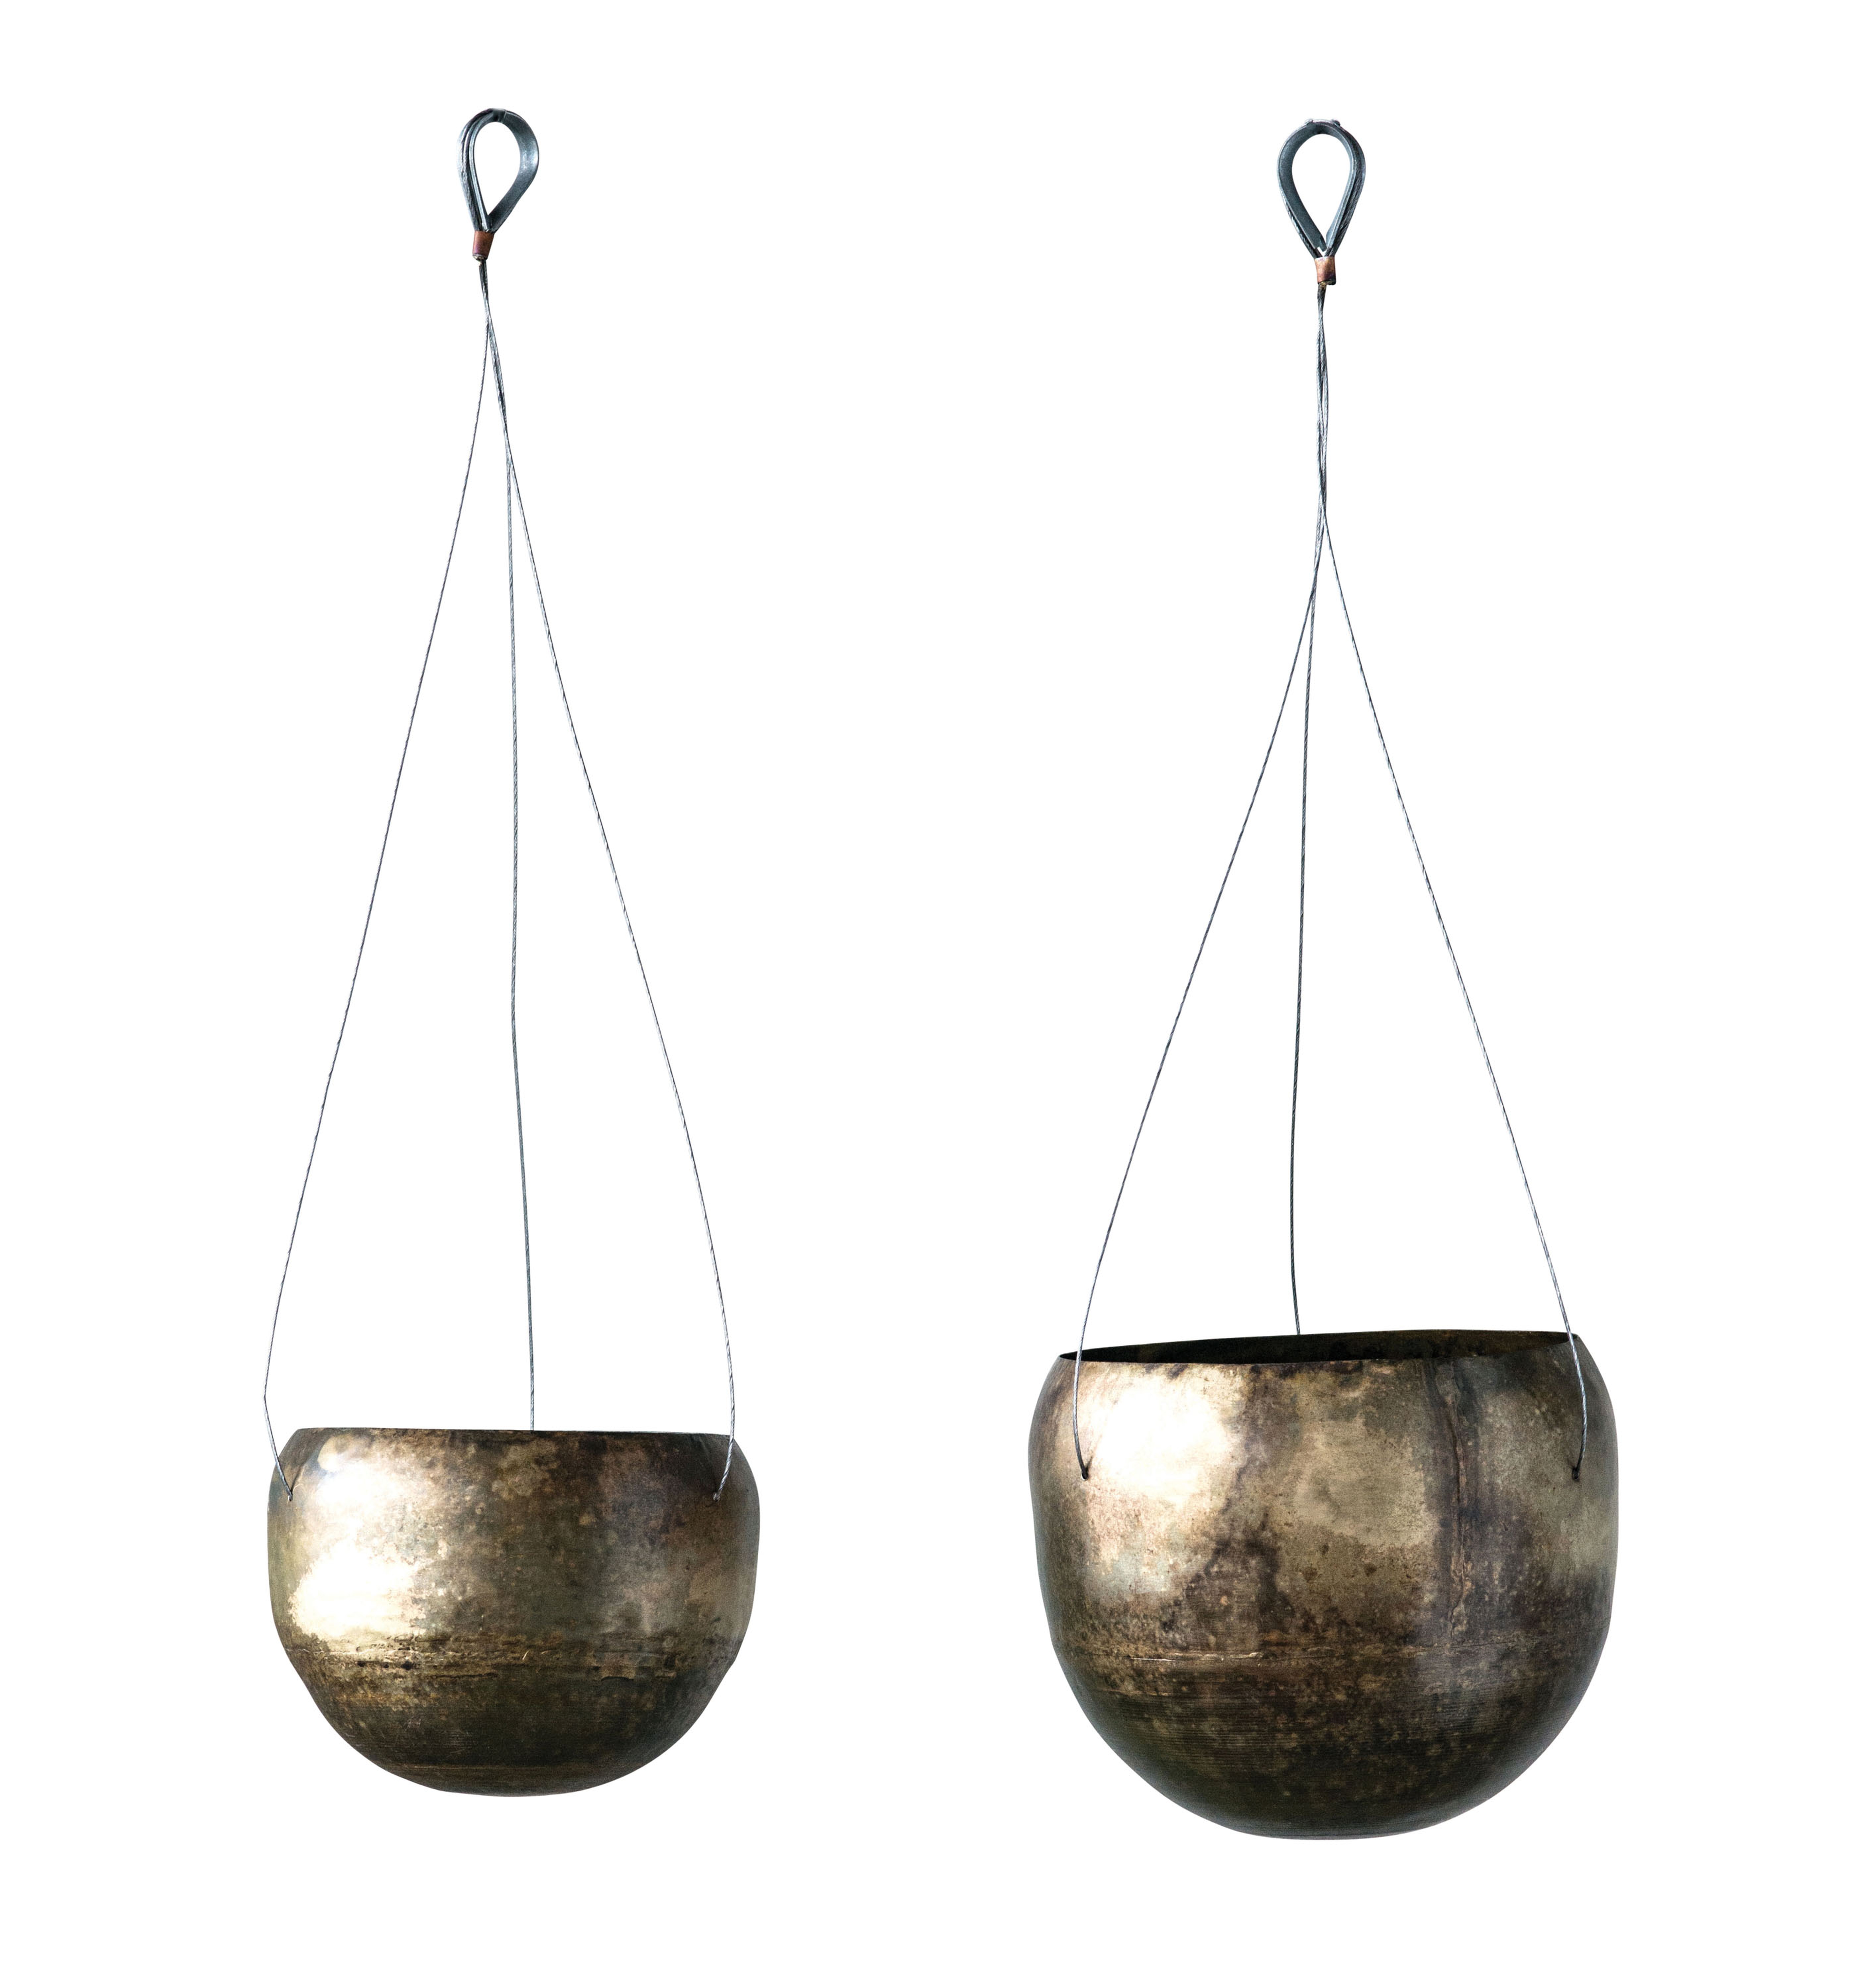 Antique Brass Hanging Planters (Set of 2 Sizes) - Nomad Home